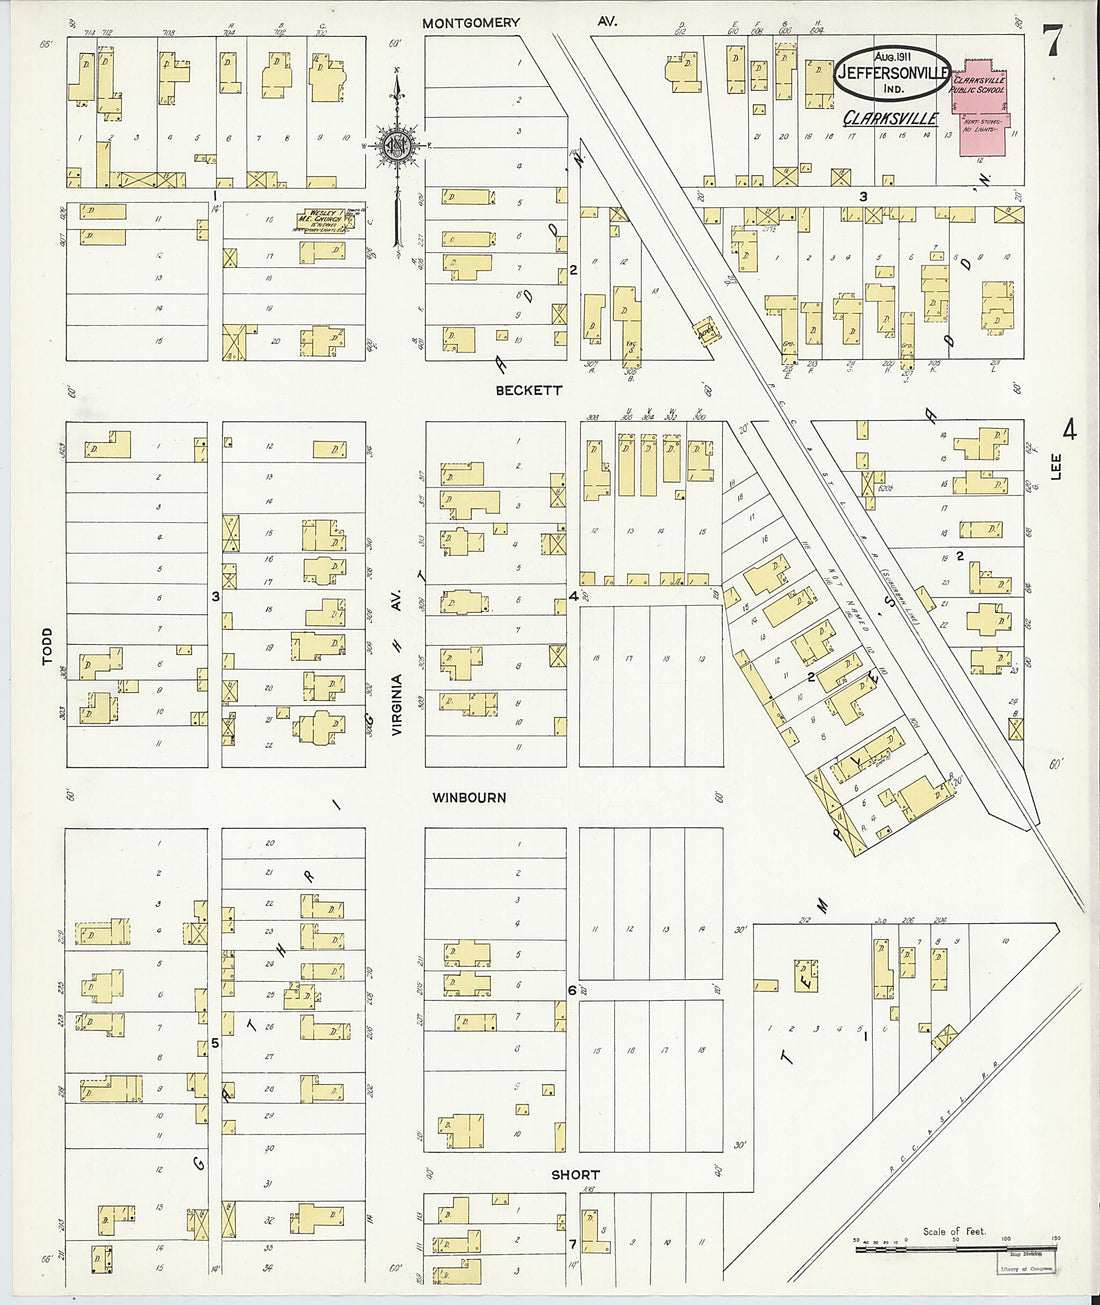 This old map of Port Fulton, Clark County, Indiana was created by Sanborn Map Company in 1911